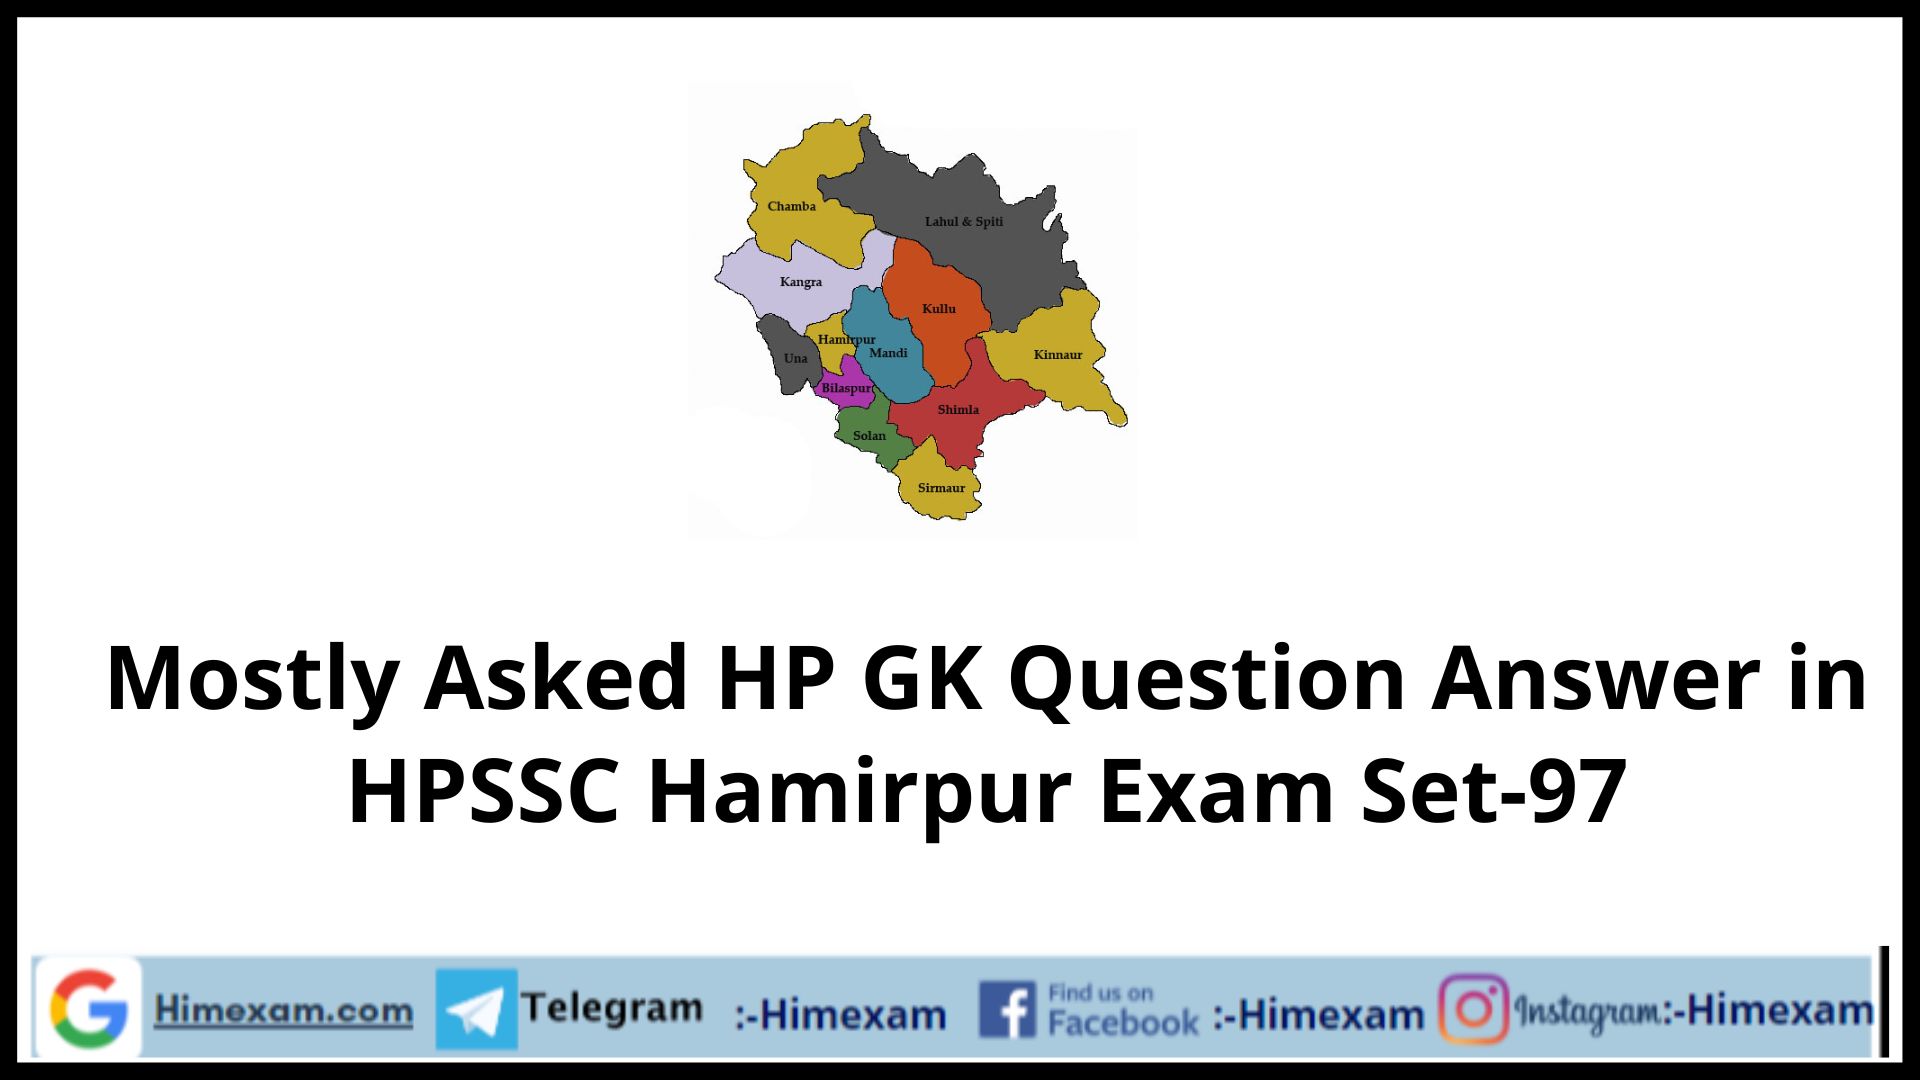 Mostly Asked HP GK Question Answer in HPSSC Hamirpur Exam Set-97